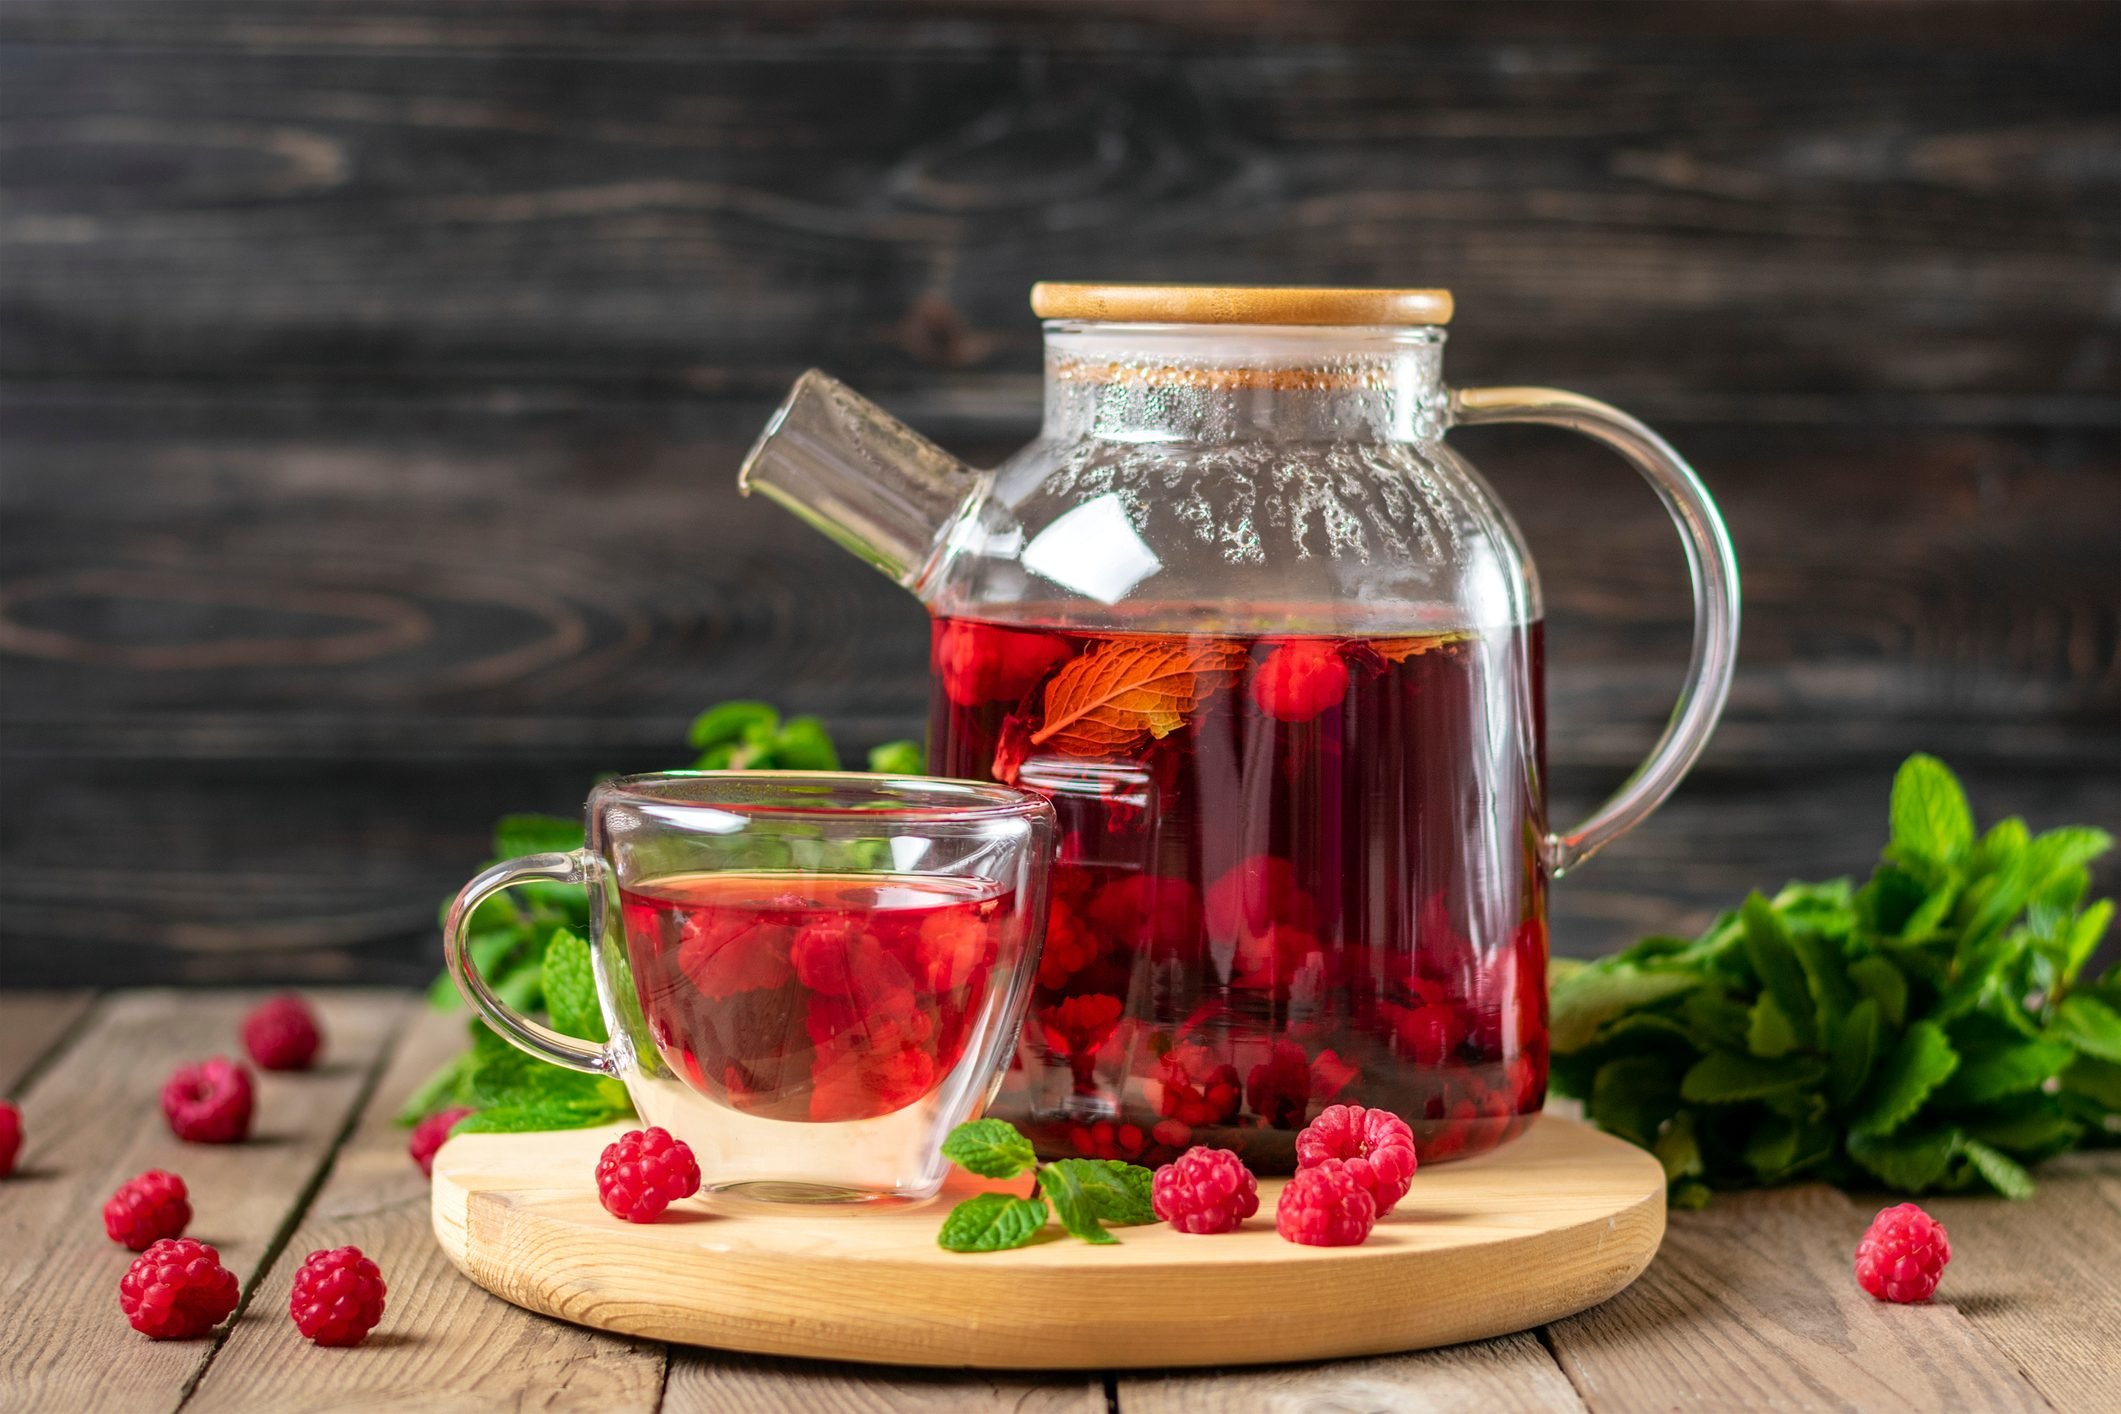 What are the Health Benefits of Red Raspberry Leaf Tea?